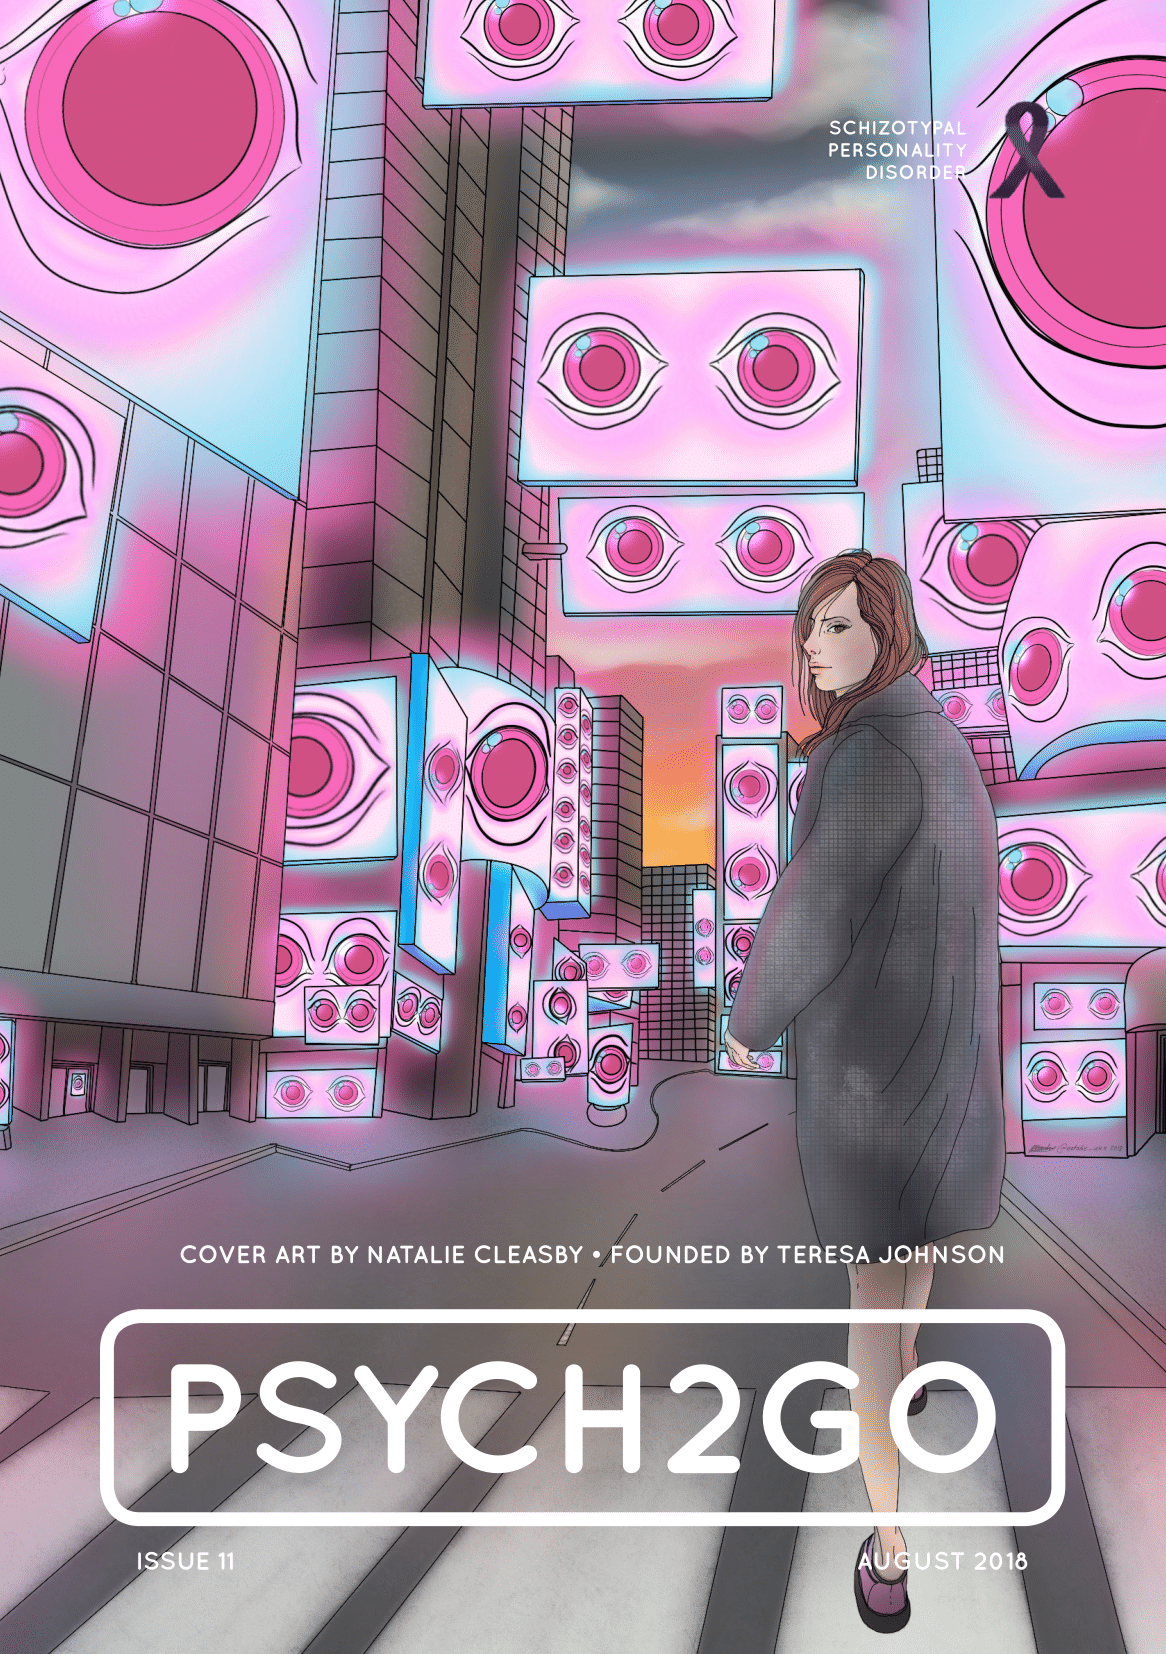 Psych2Go Magazine #11 - Poster (Schizotypal Personality disorder Awareness)